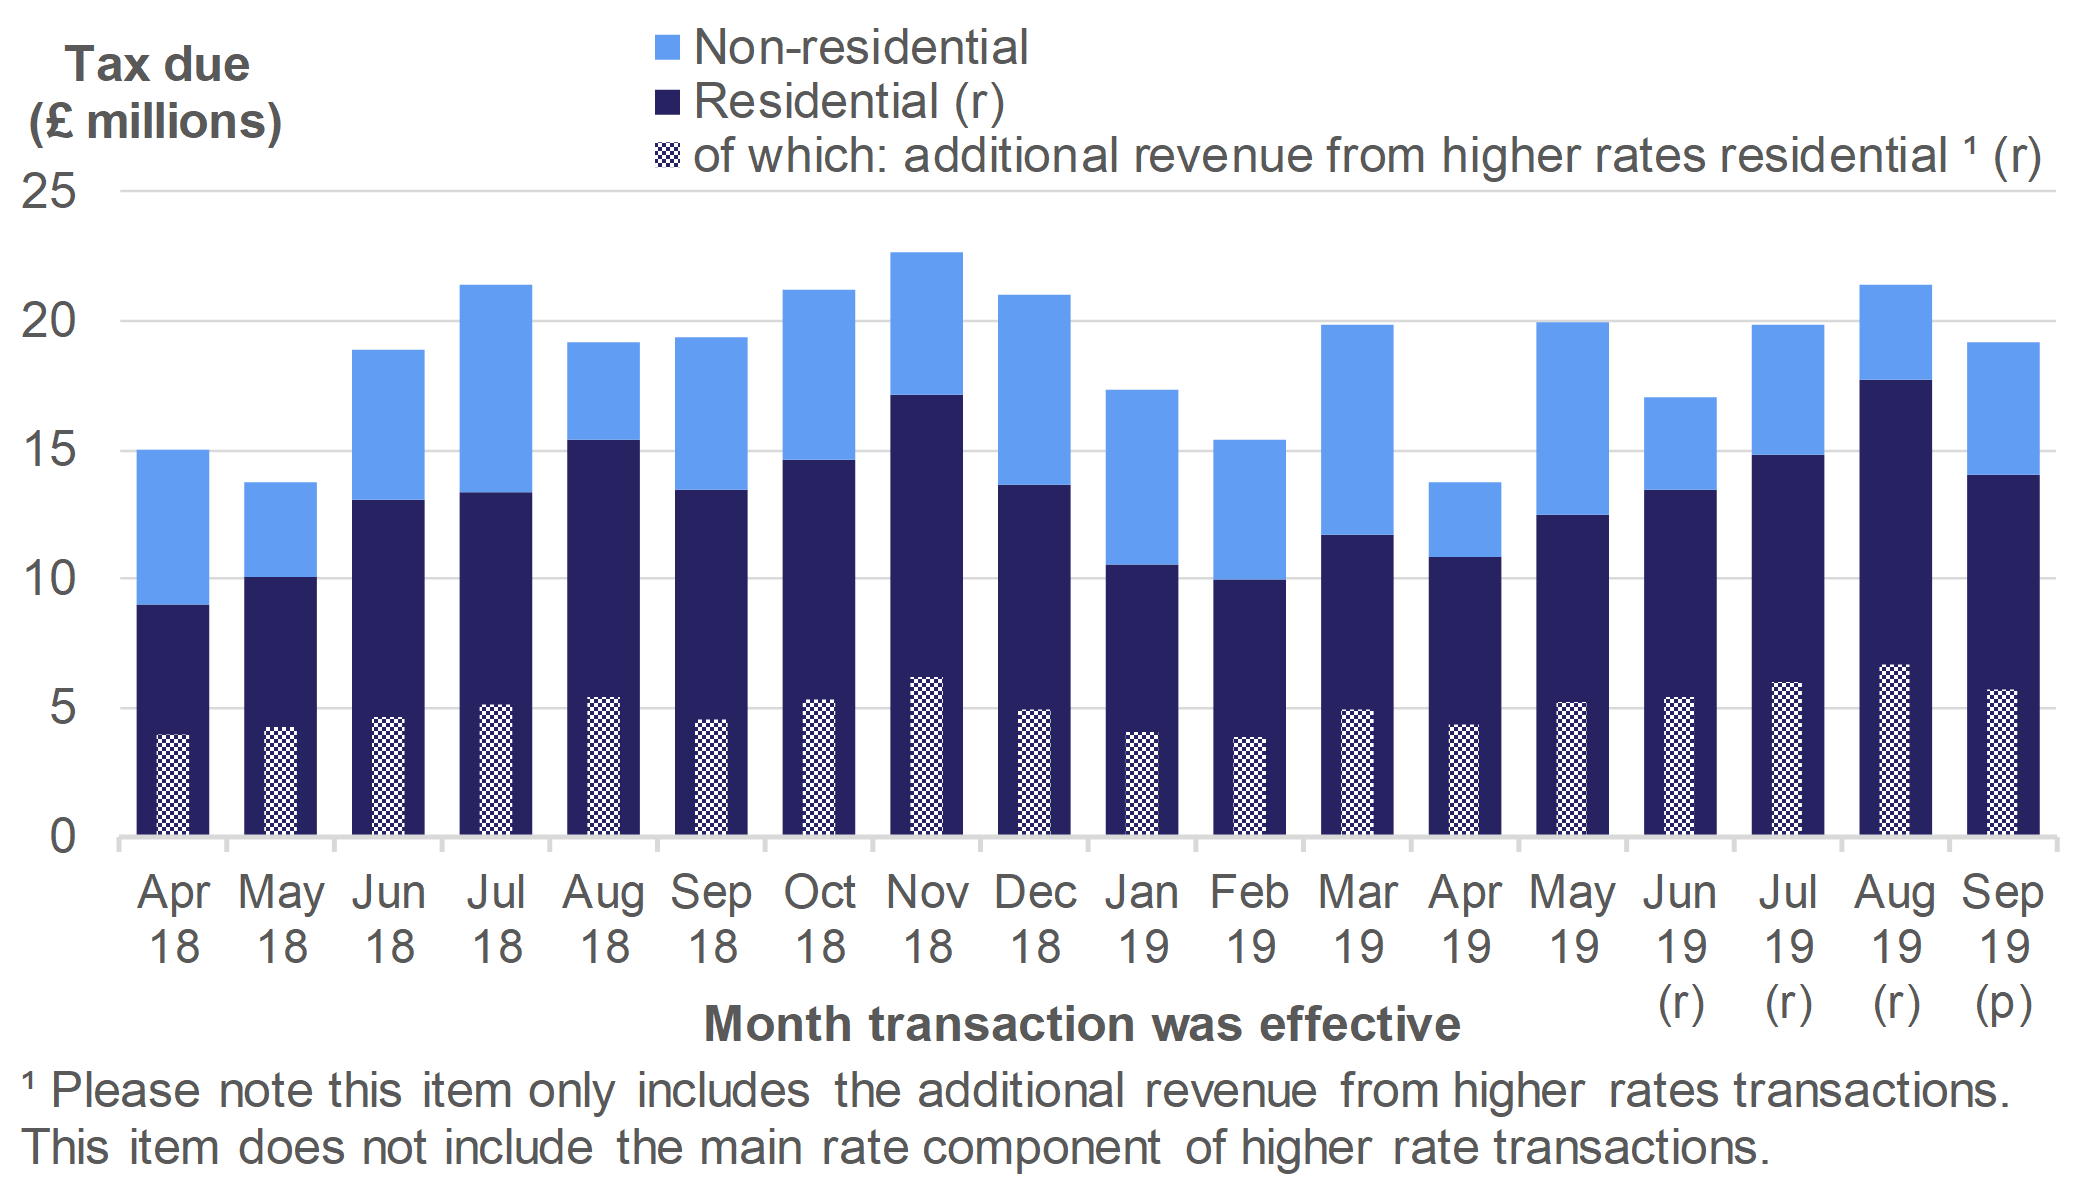 Figure 2.5 shows the monthly amount of tax due on reported notifiable transactions from April 2018 to September 2019, for residential and non-residential transactions.